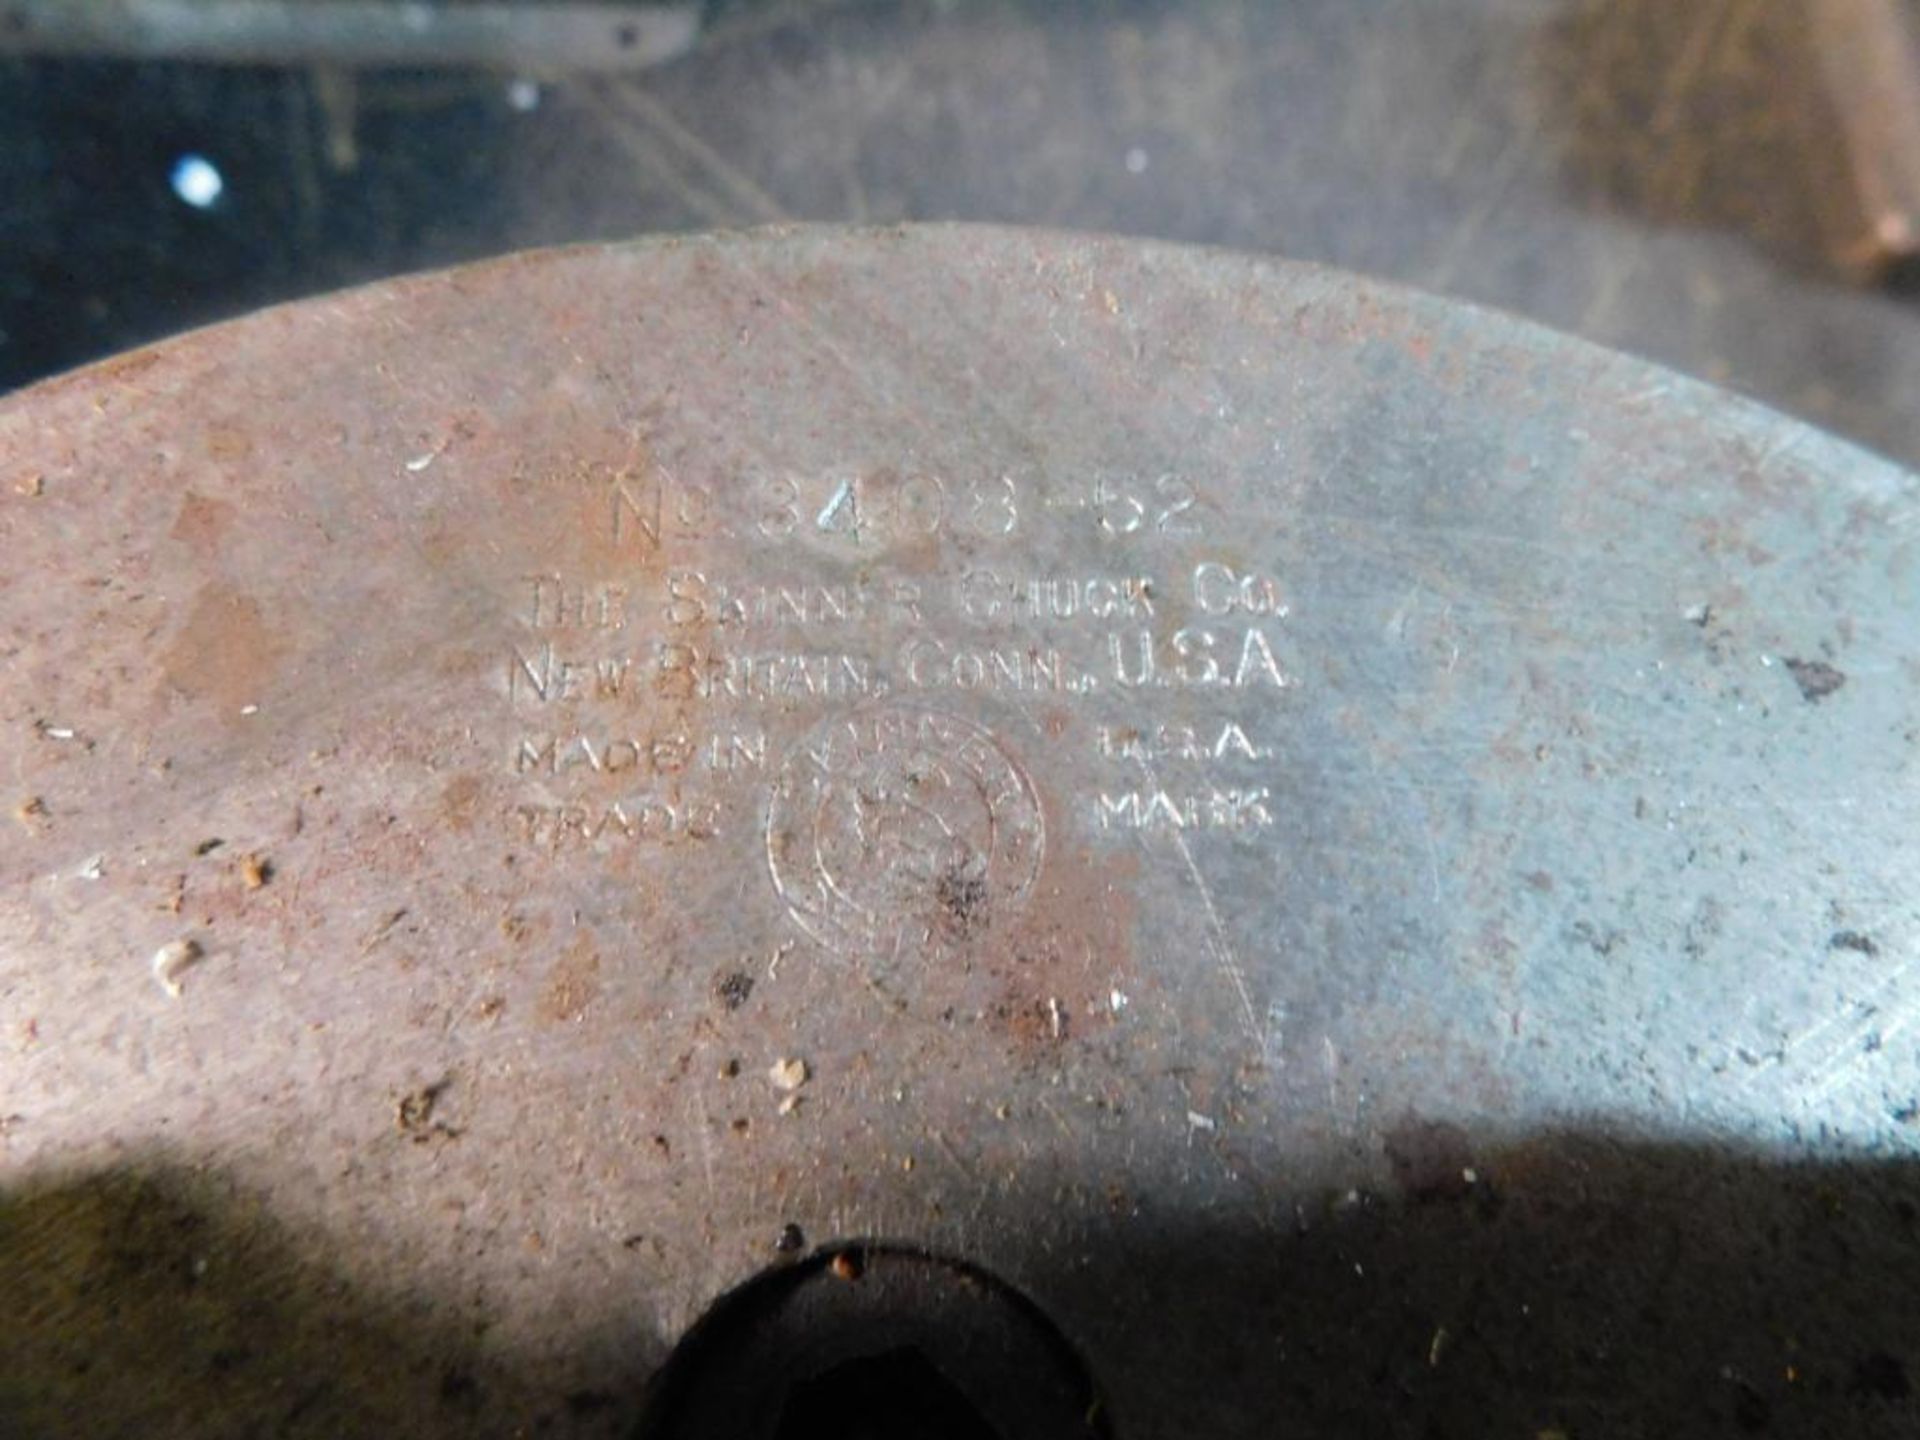 8" Skinner Chuck Co. 3-Jaw Chuck - Image 3 of 3